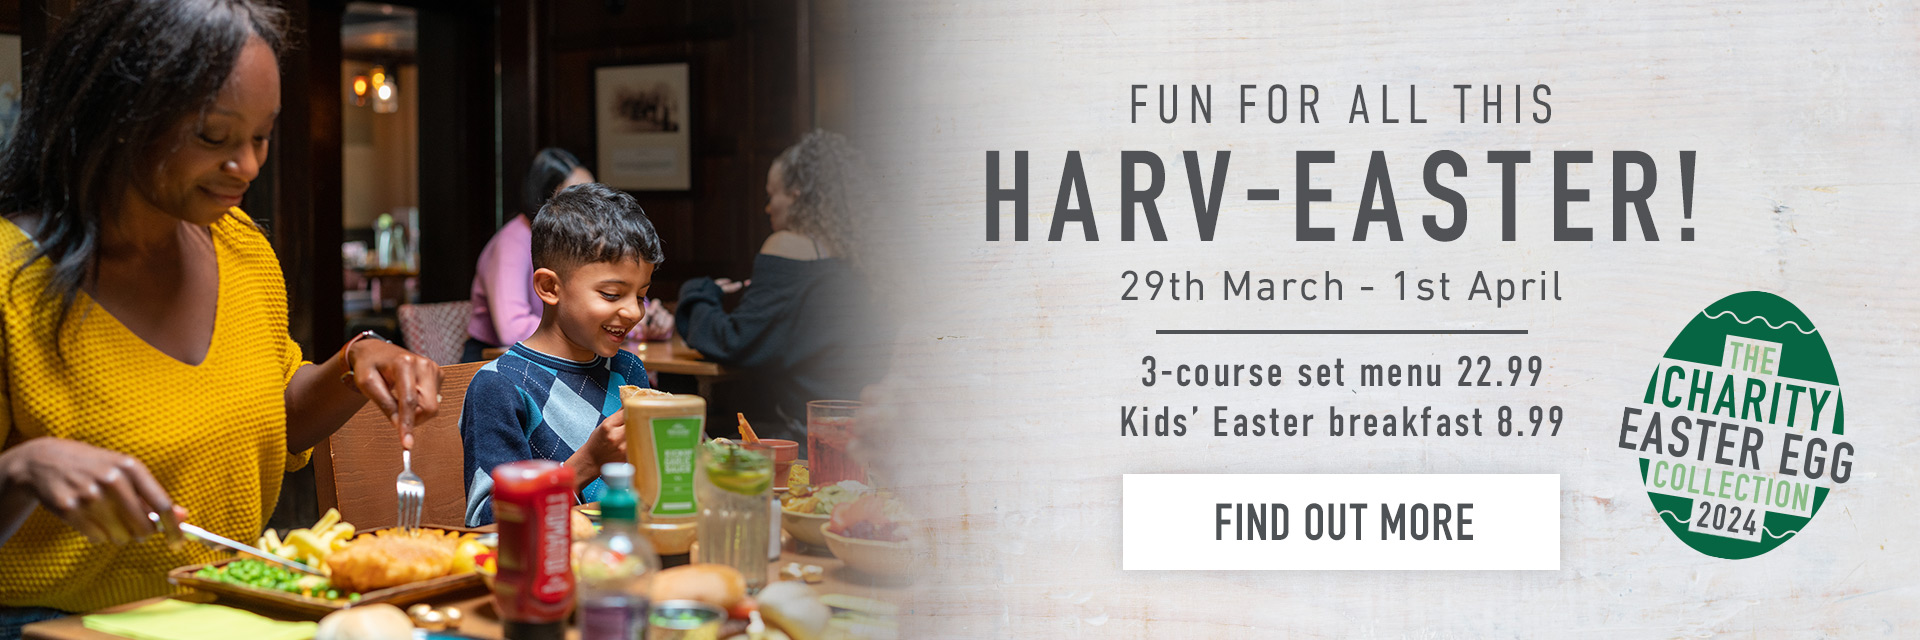 Easter at Harvester Croxley Green in Rickmansworth